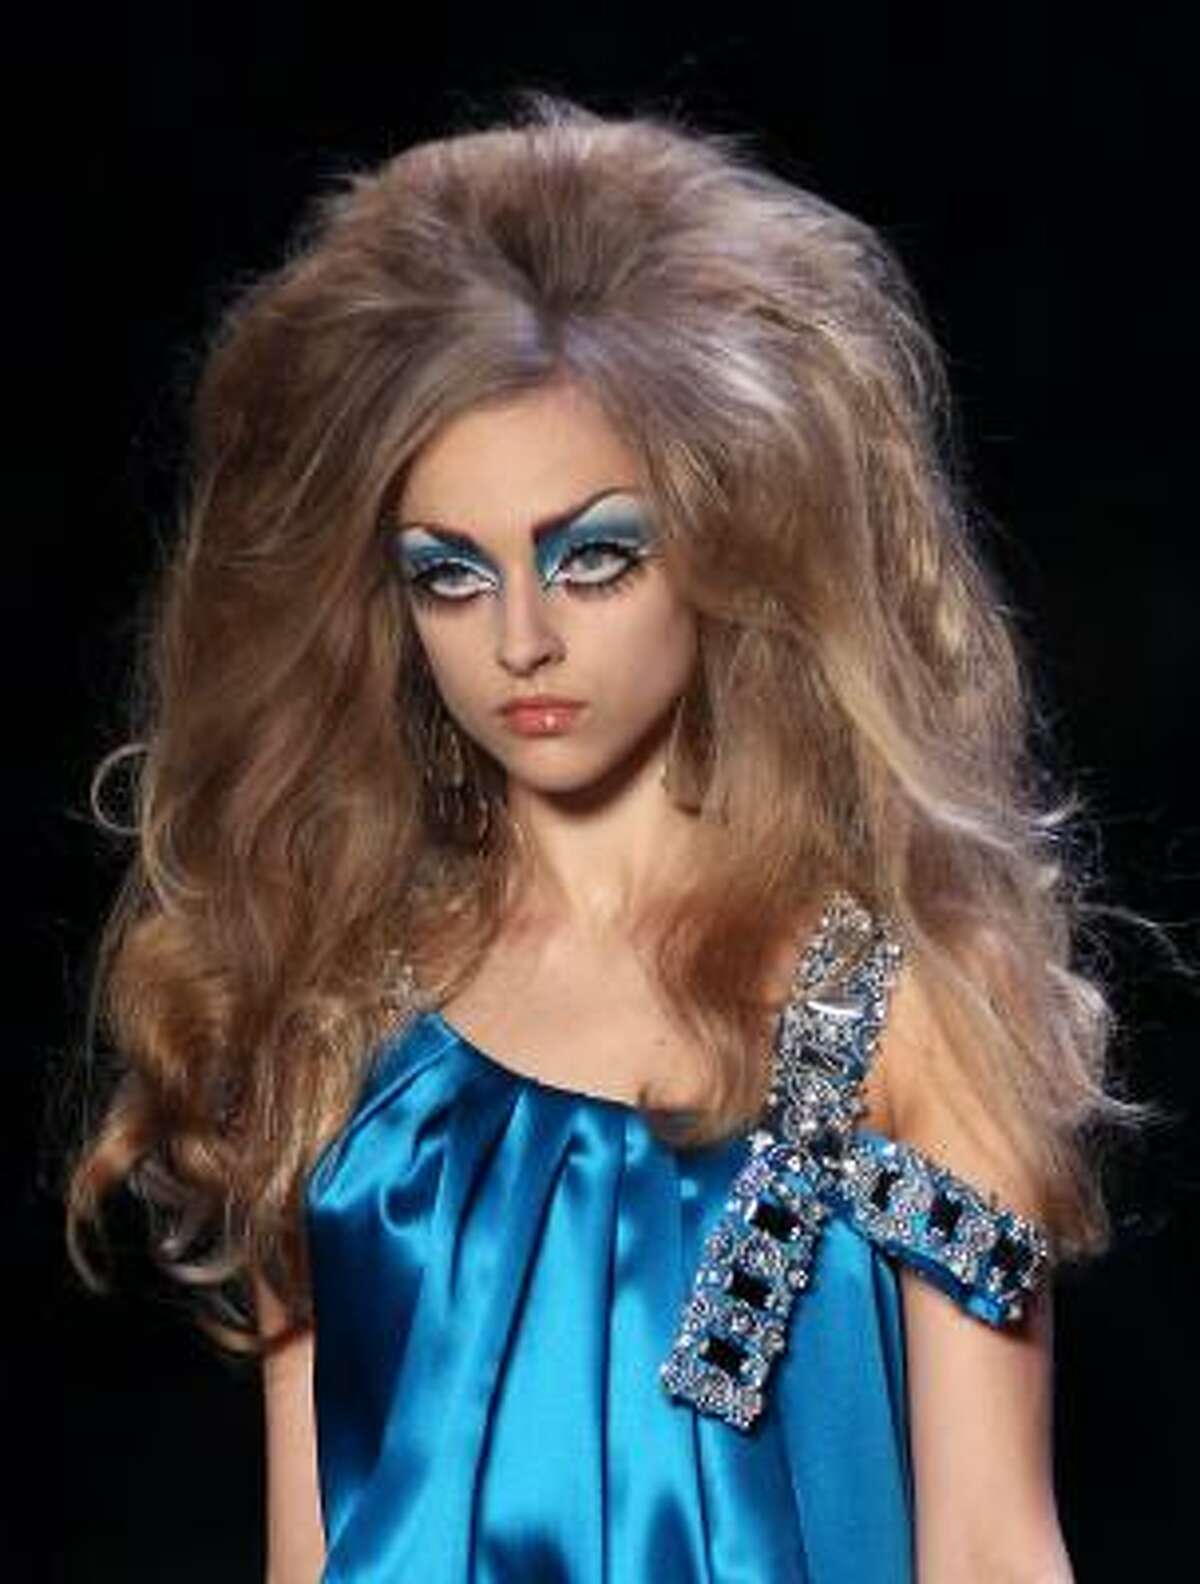 British designer John Galliano for Dior featured bouffant hairstyles in his fall show in Paris.